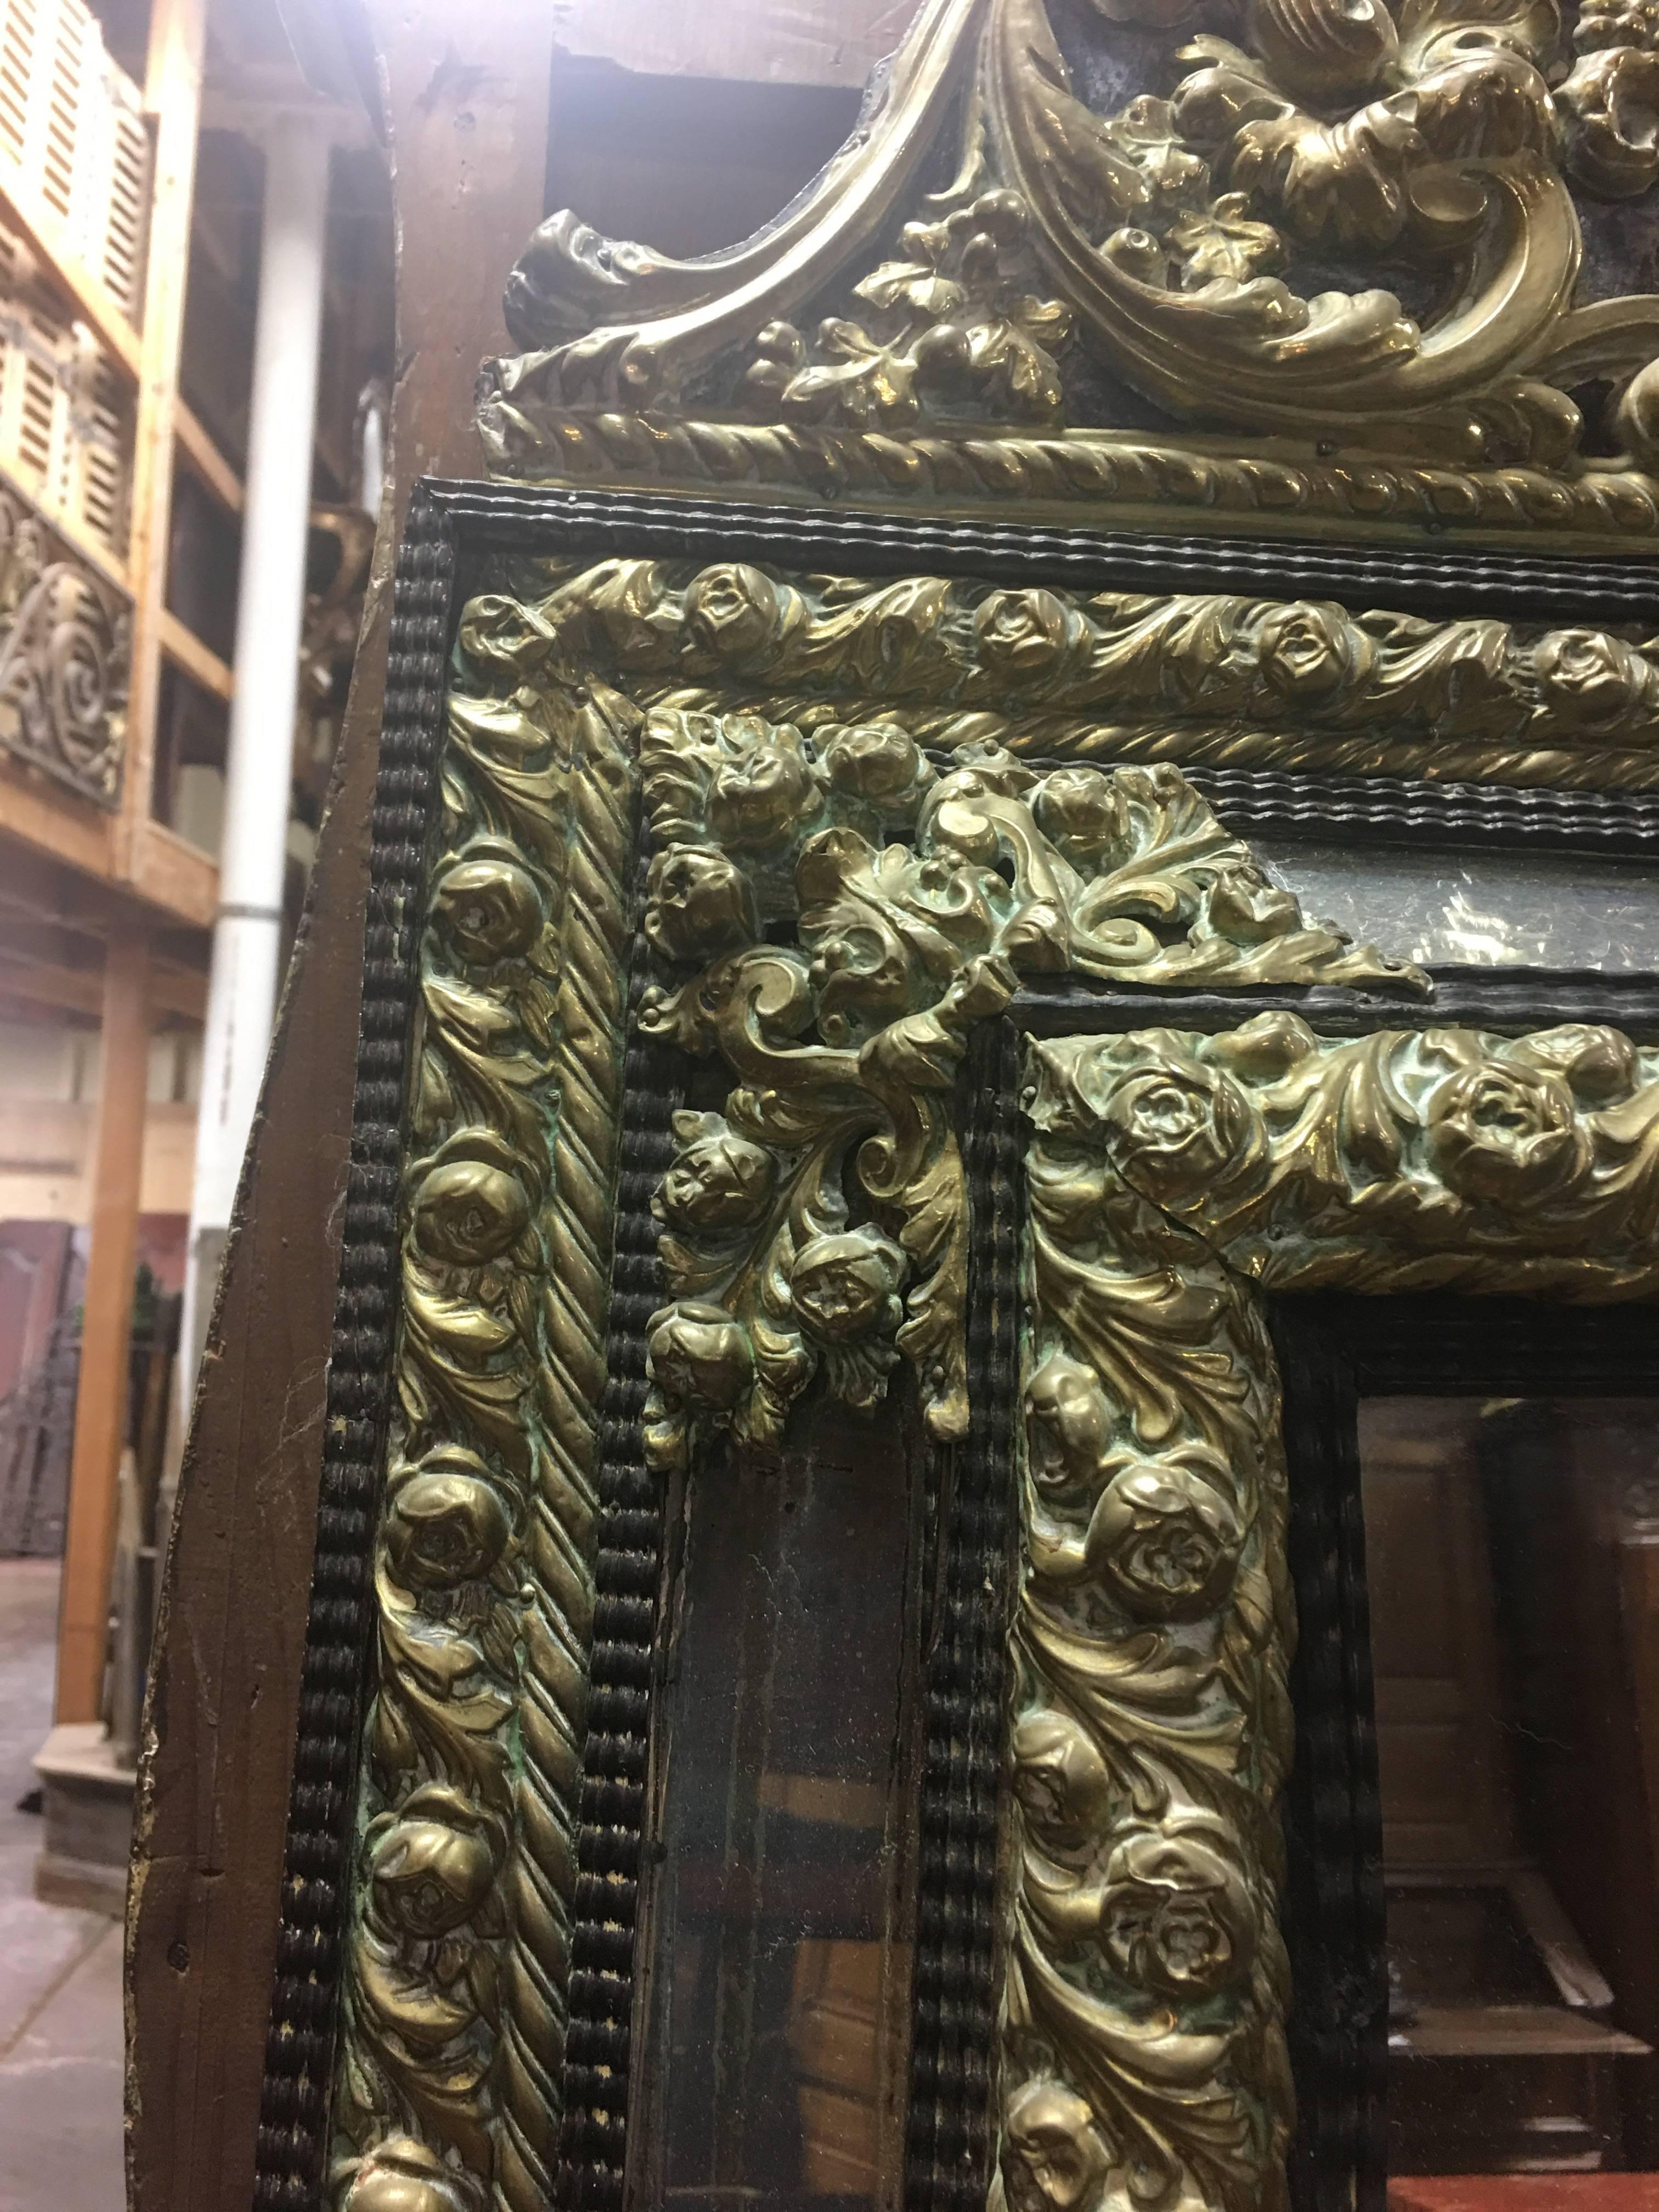 19th century French Louis XIV style ebony and gilded brass mirror.